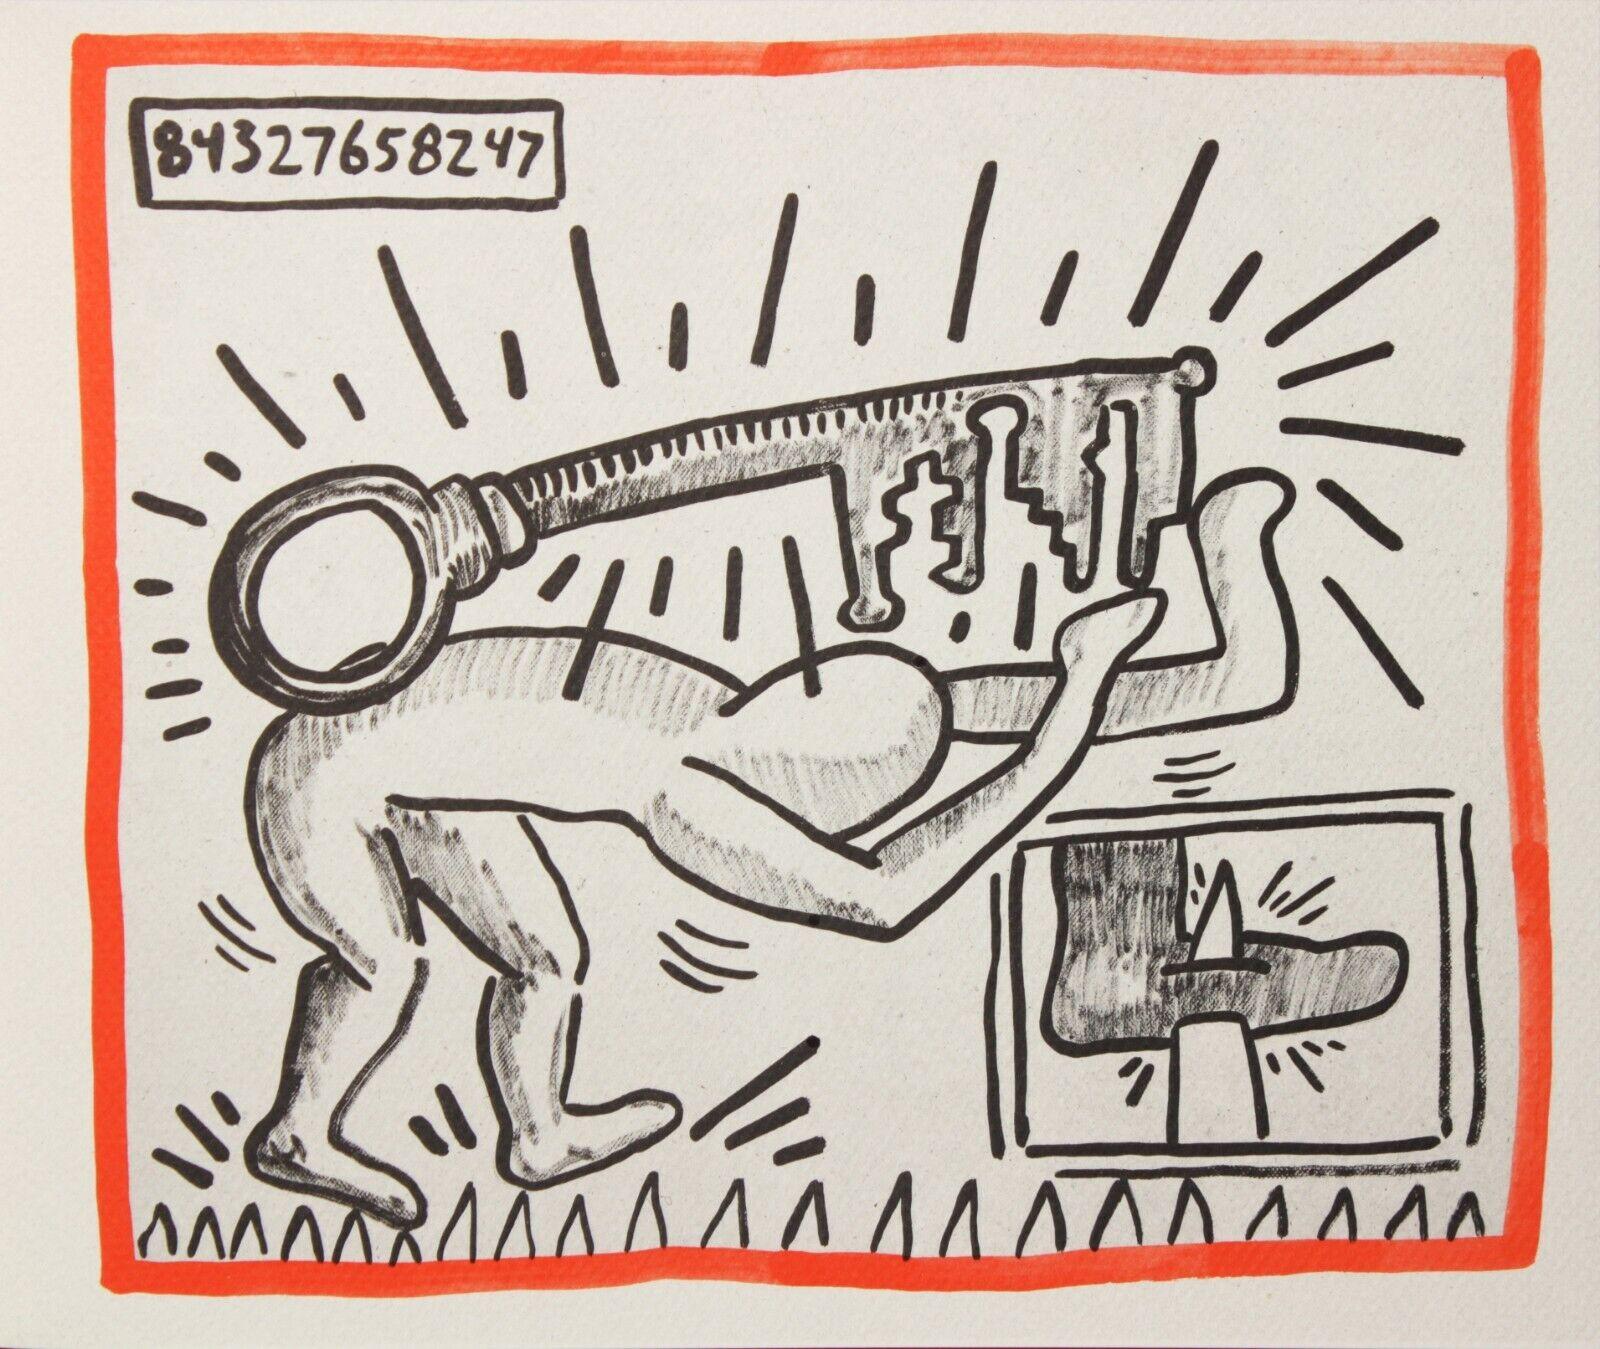 Keith Haring "Against all odds" 1990